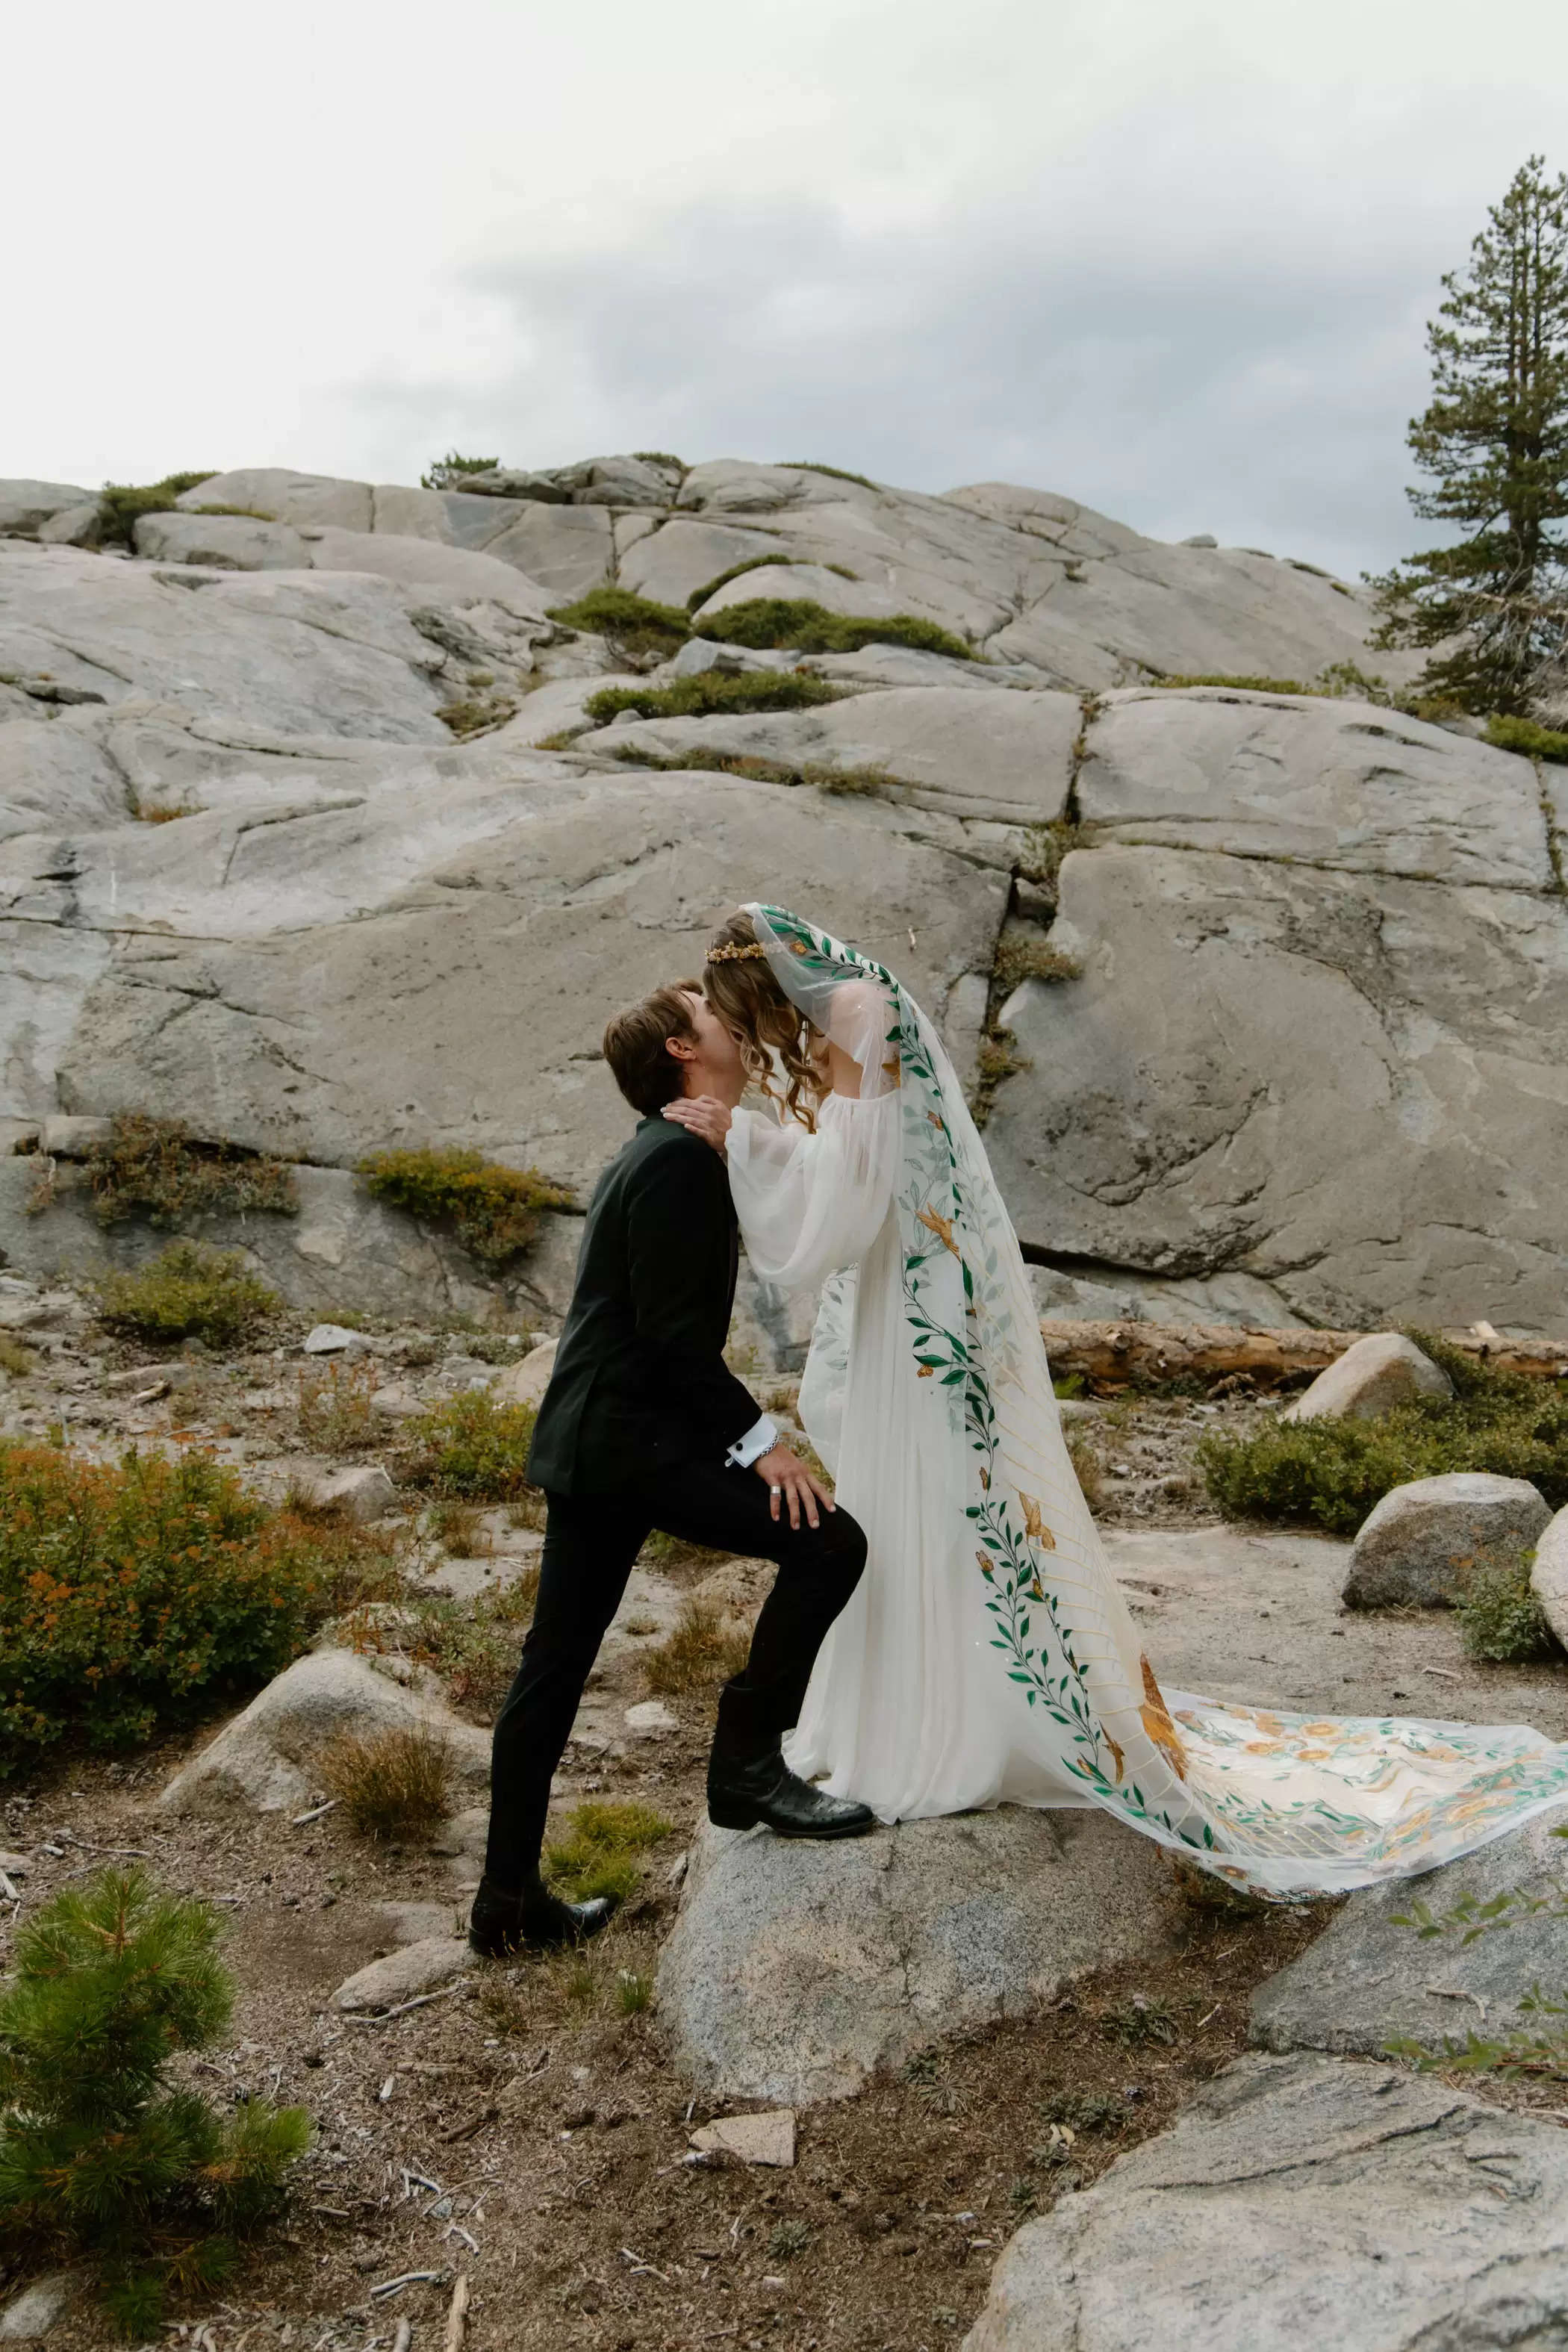 A Rustic Western Marriage ceremony within the Sierra Nevada Mountains with an Epic Embroidered Veil